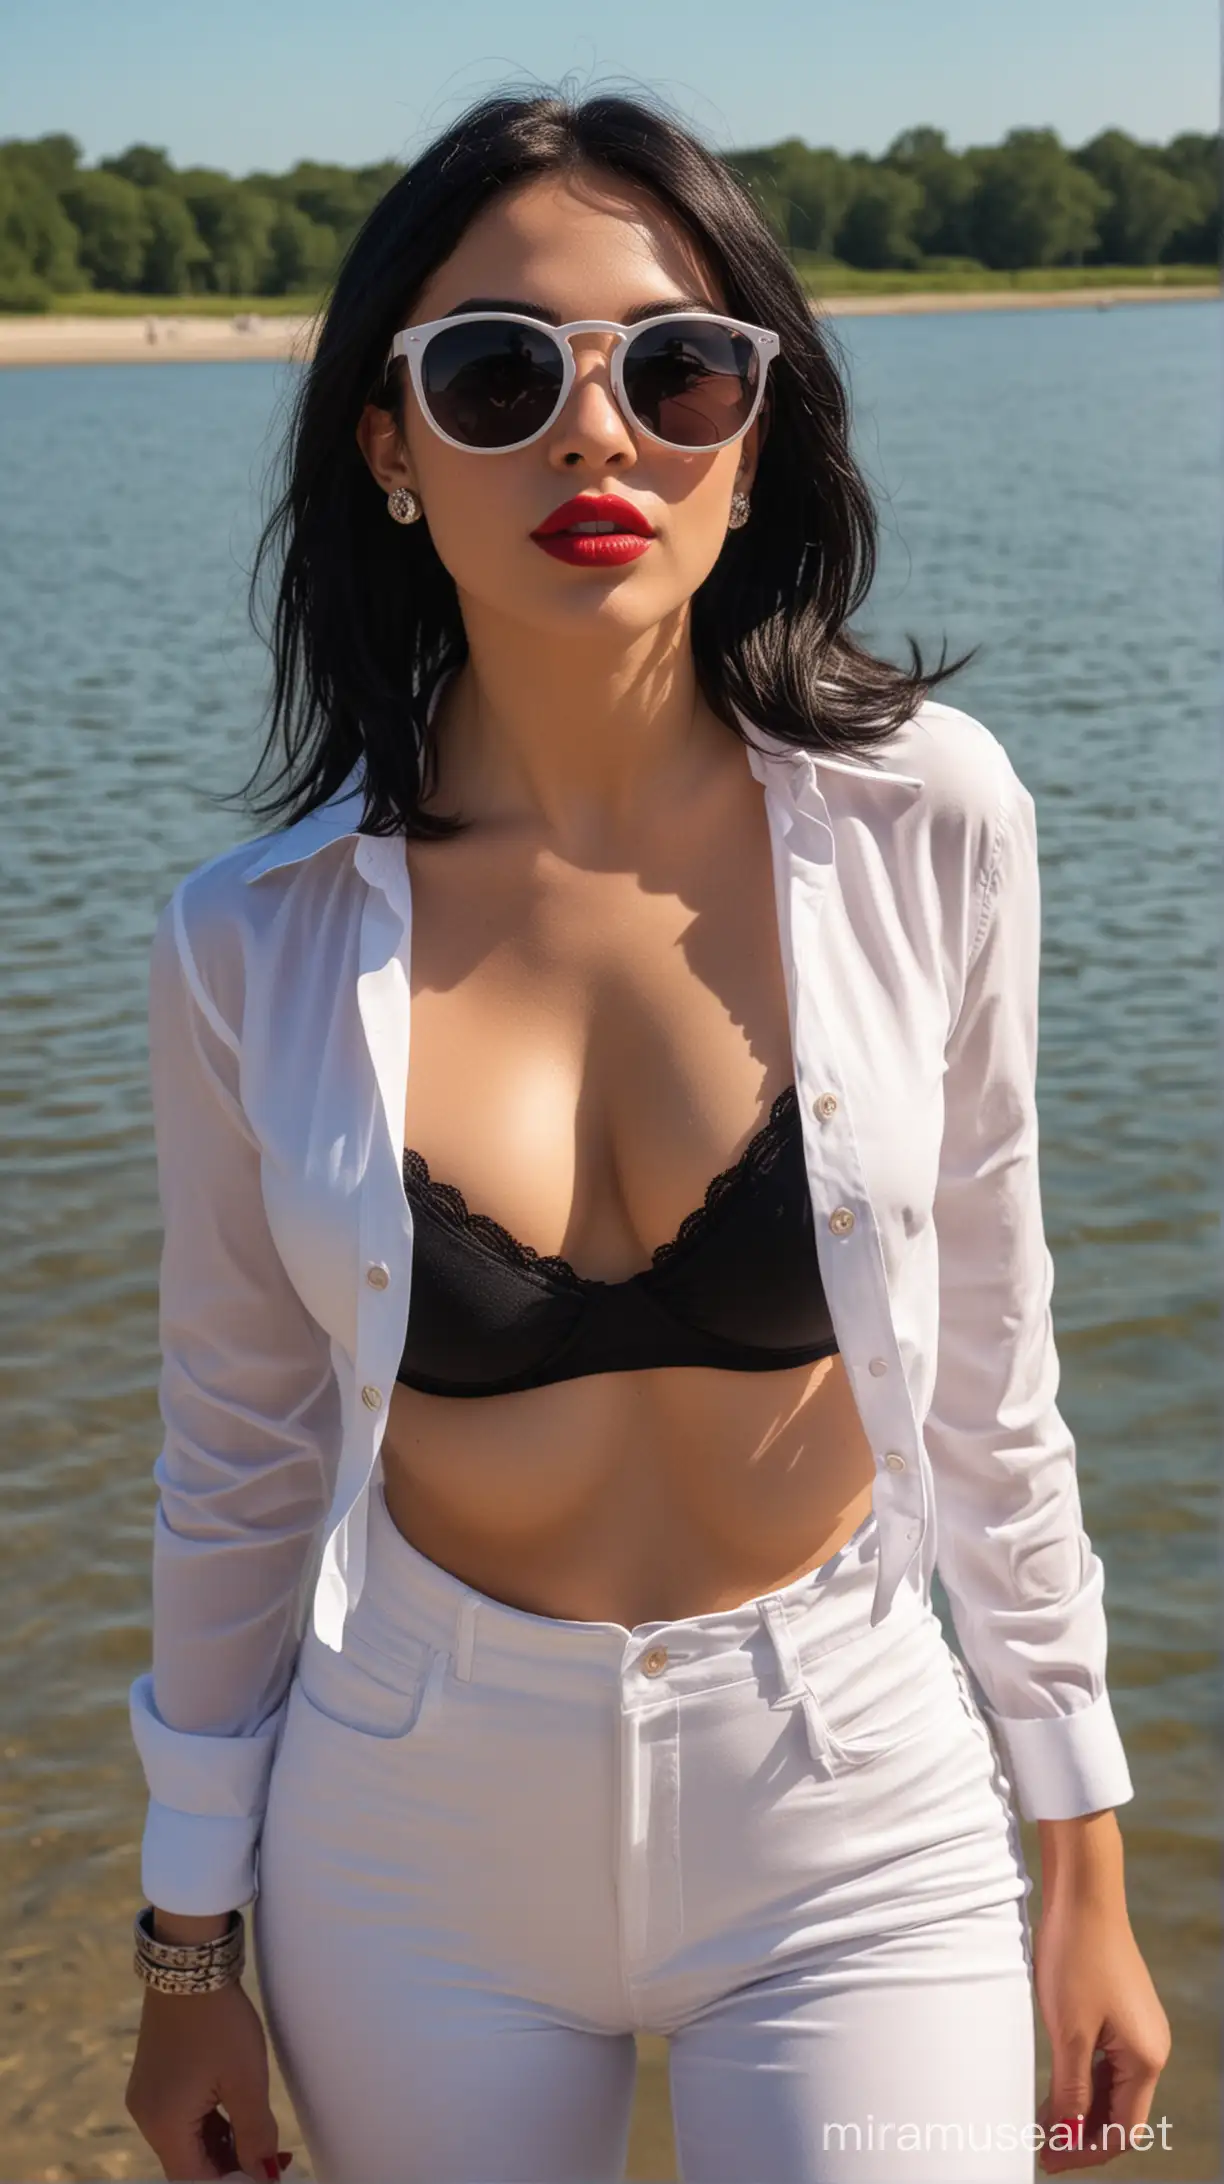 4k Ai art front view beautiful USA girl black sun glasses black hair red lipstick ear tops white trousers and black button shirt and pink bra in usa pope beach lake